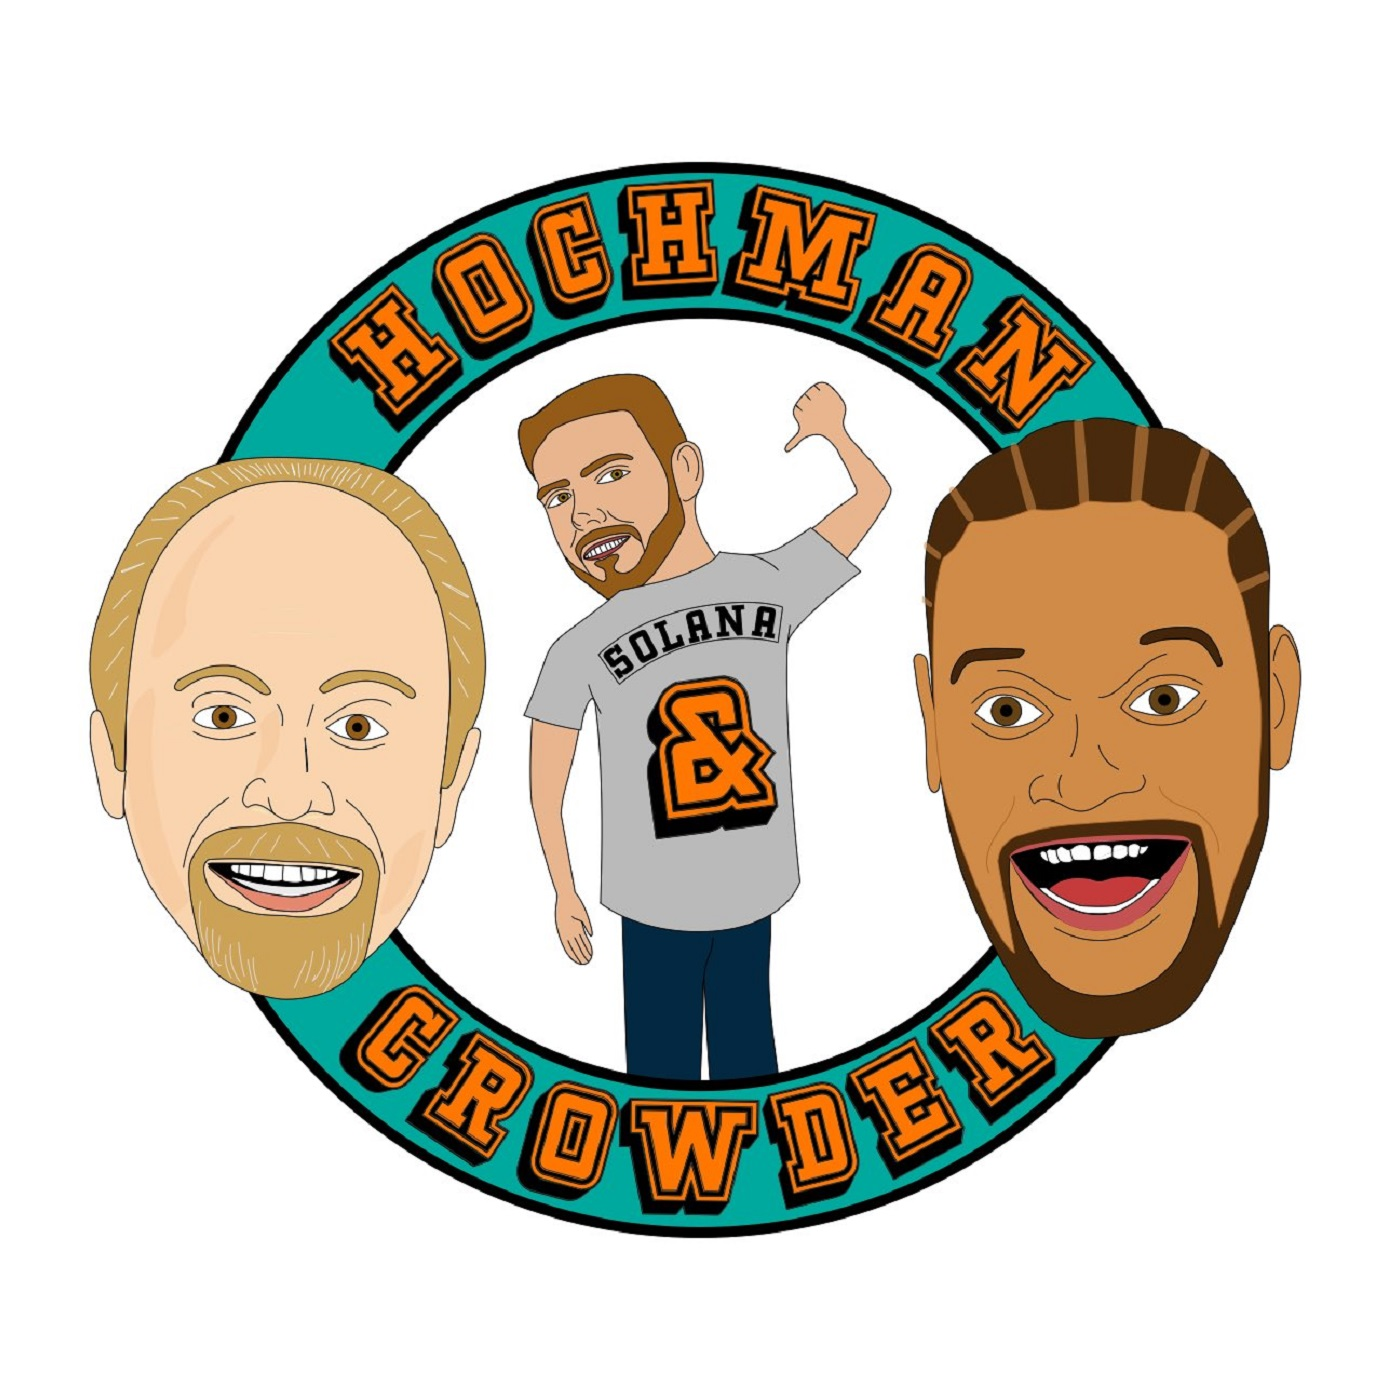 07-01-2019 - Hoch and Crowder Podcast Hour 1